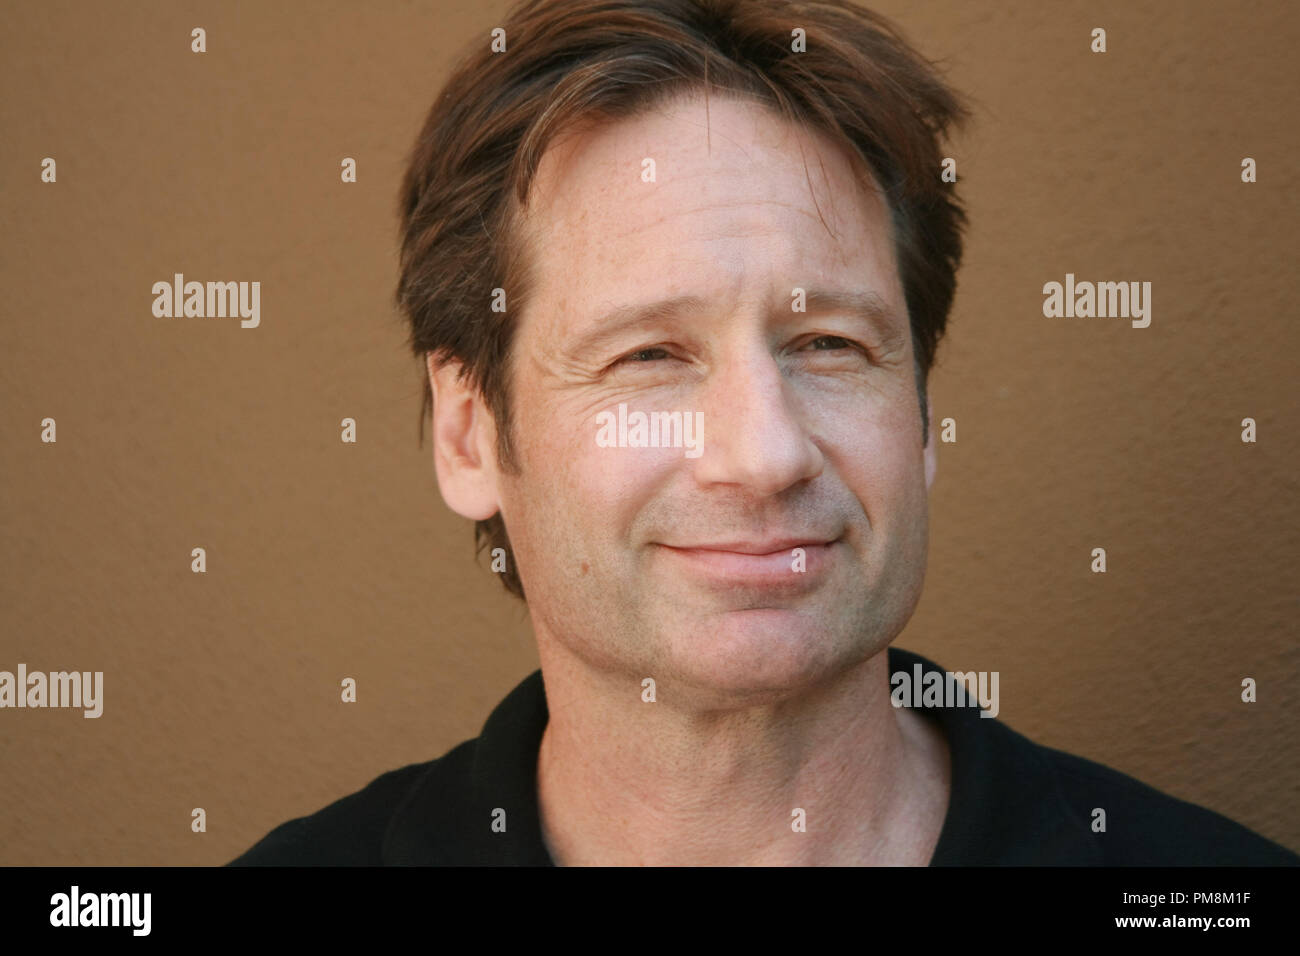 David Duchovny 'Californication' Portrait Session, August 10, 2012.  Reproduction by American tabloids is absolutely forbidden. File Reference # 31632 010JRC  For Editorial Use Only -  All Rights Reserved Stock Photo